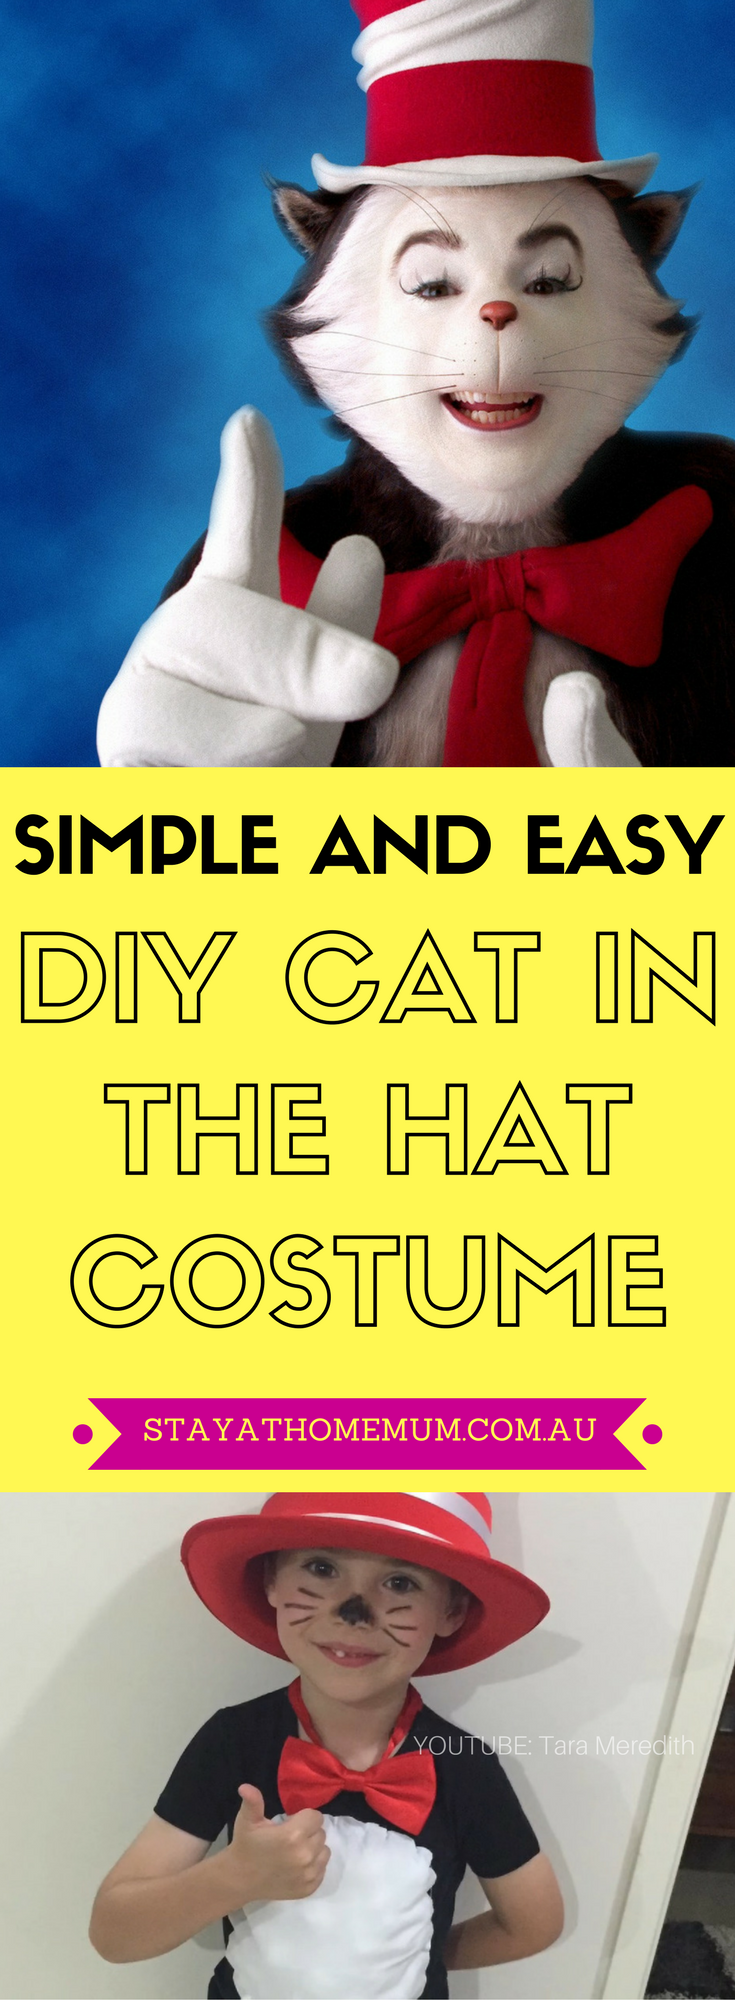 Simple And Easy DIY Cat In The Hat Costume 1 | Stay at Home Mum.com.au